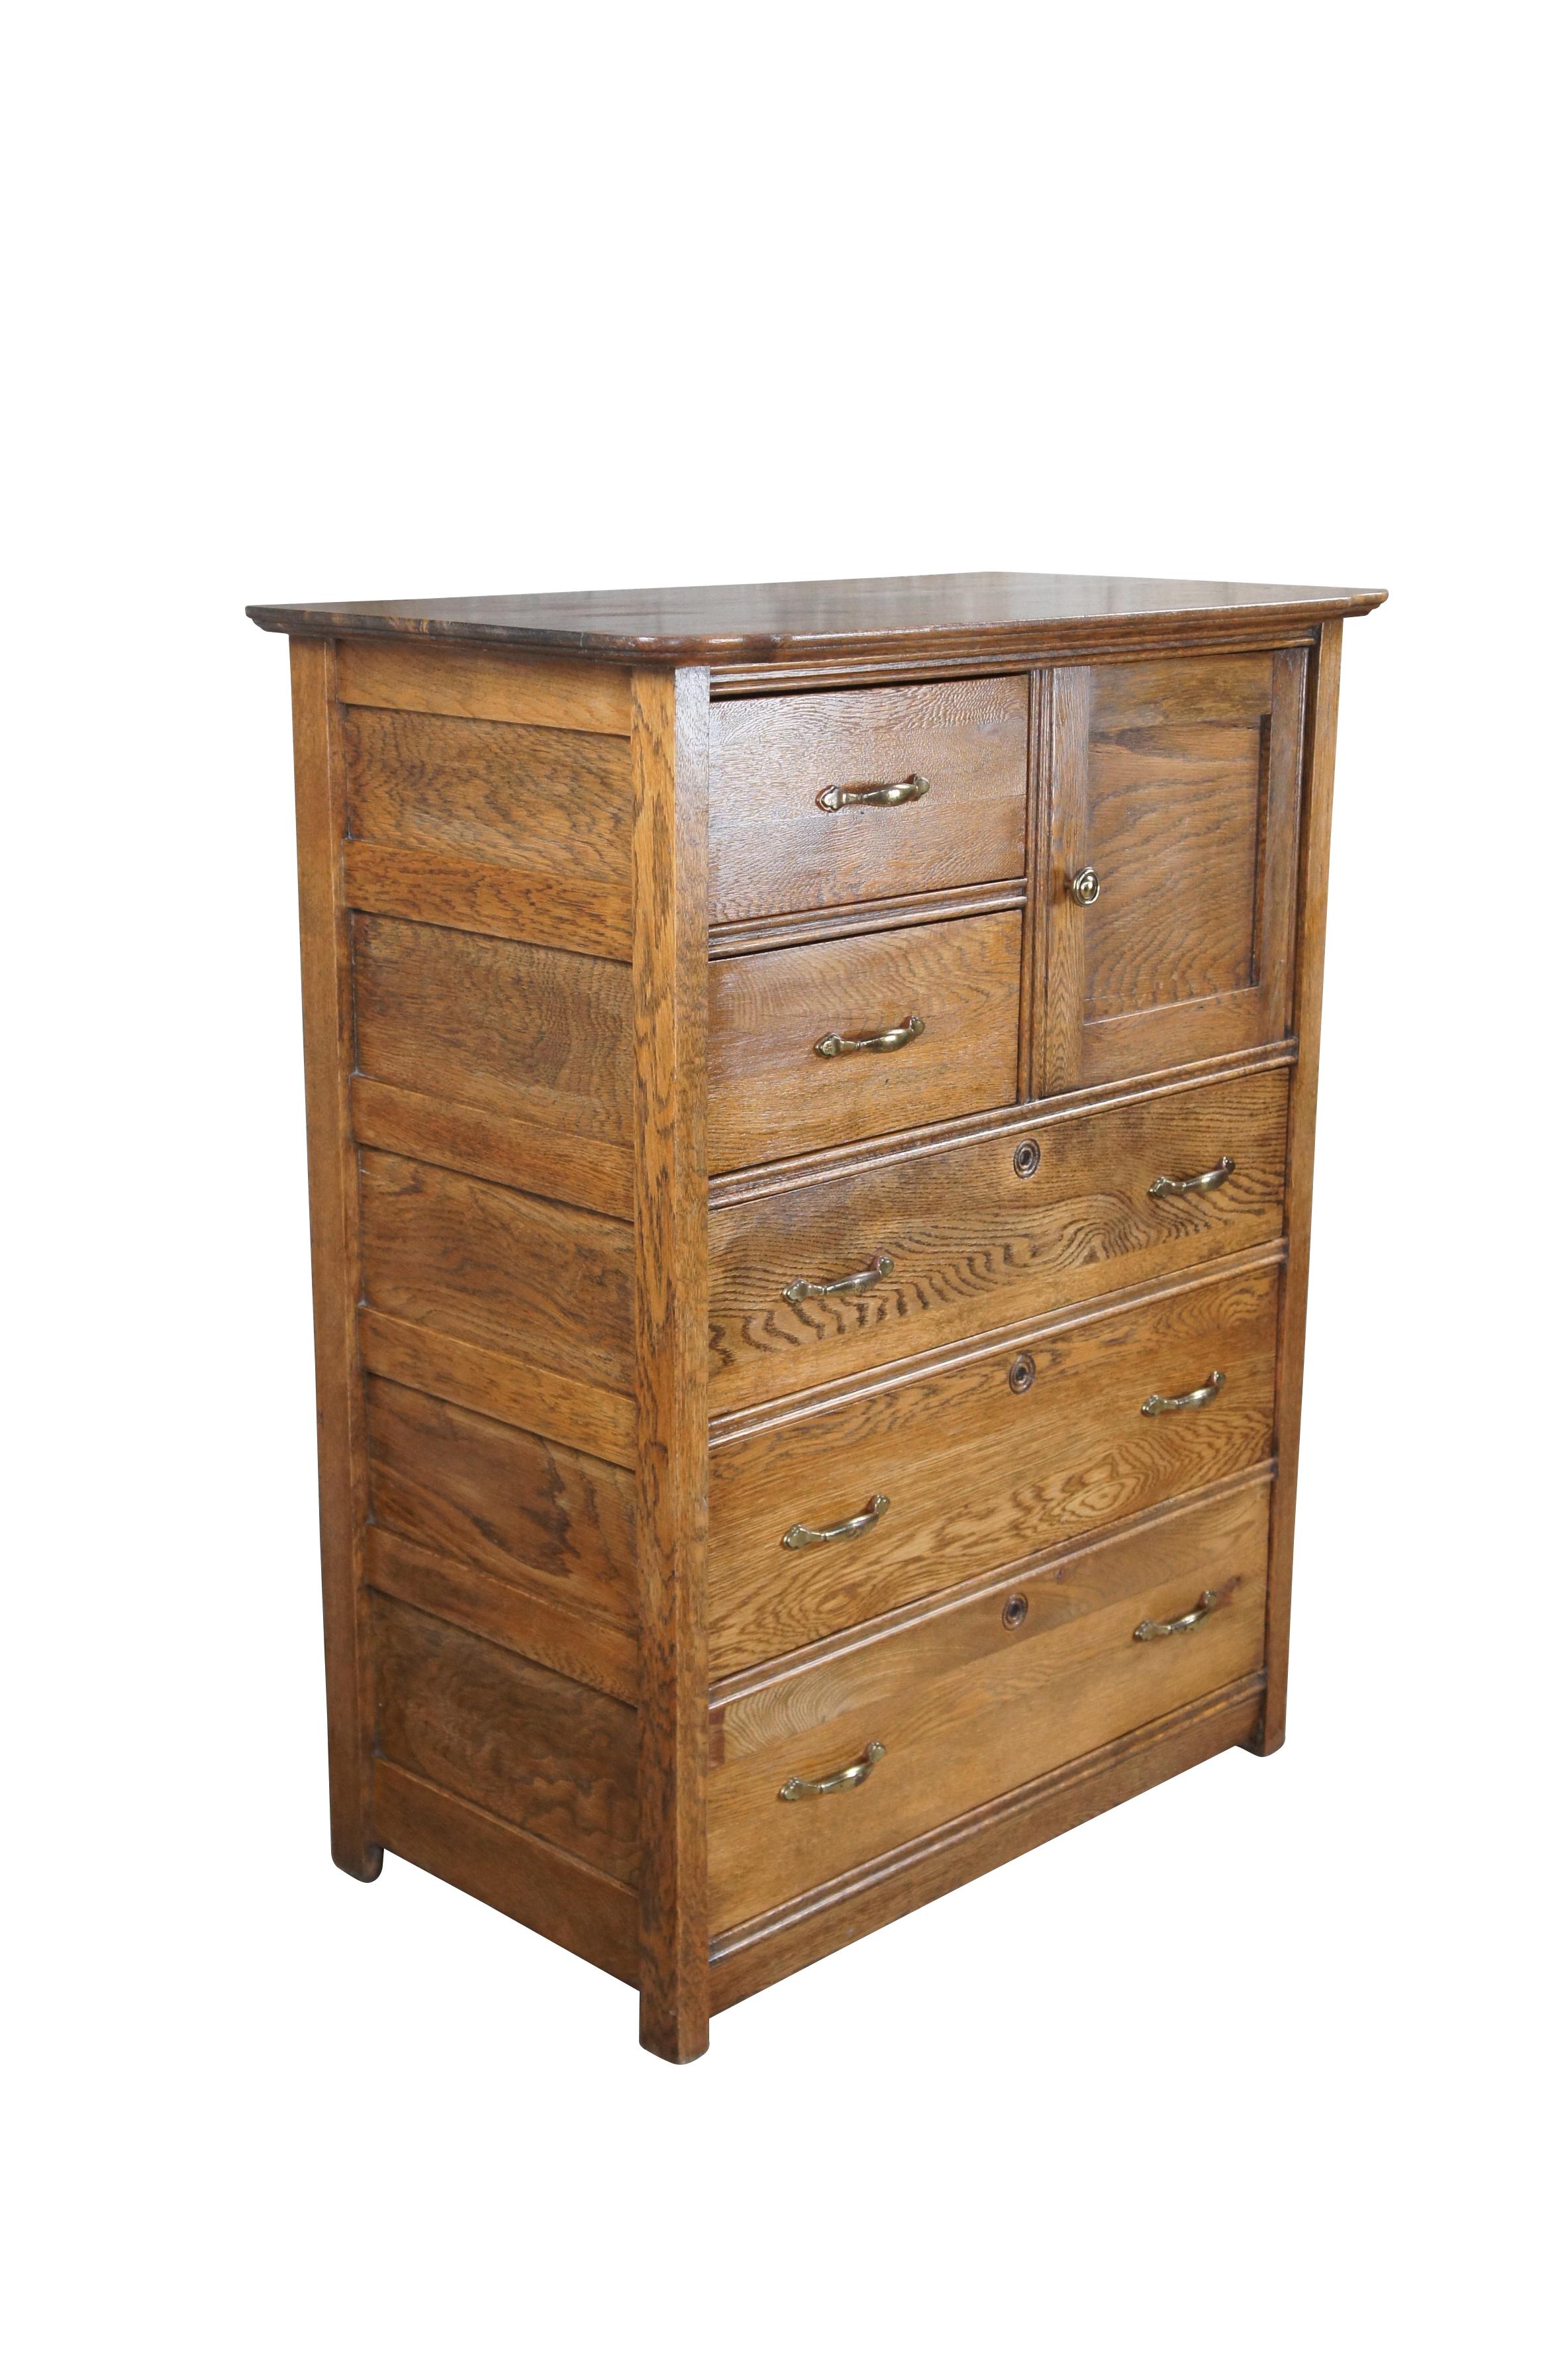 American Victorian Tallboy dresser, circa 1900s.  Made from oak with five drawers and side cubby.  Features paneled siding and brass hardware.  

Dimensions:
18